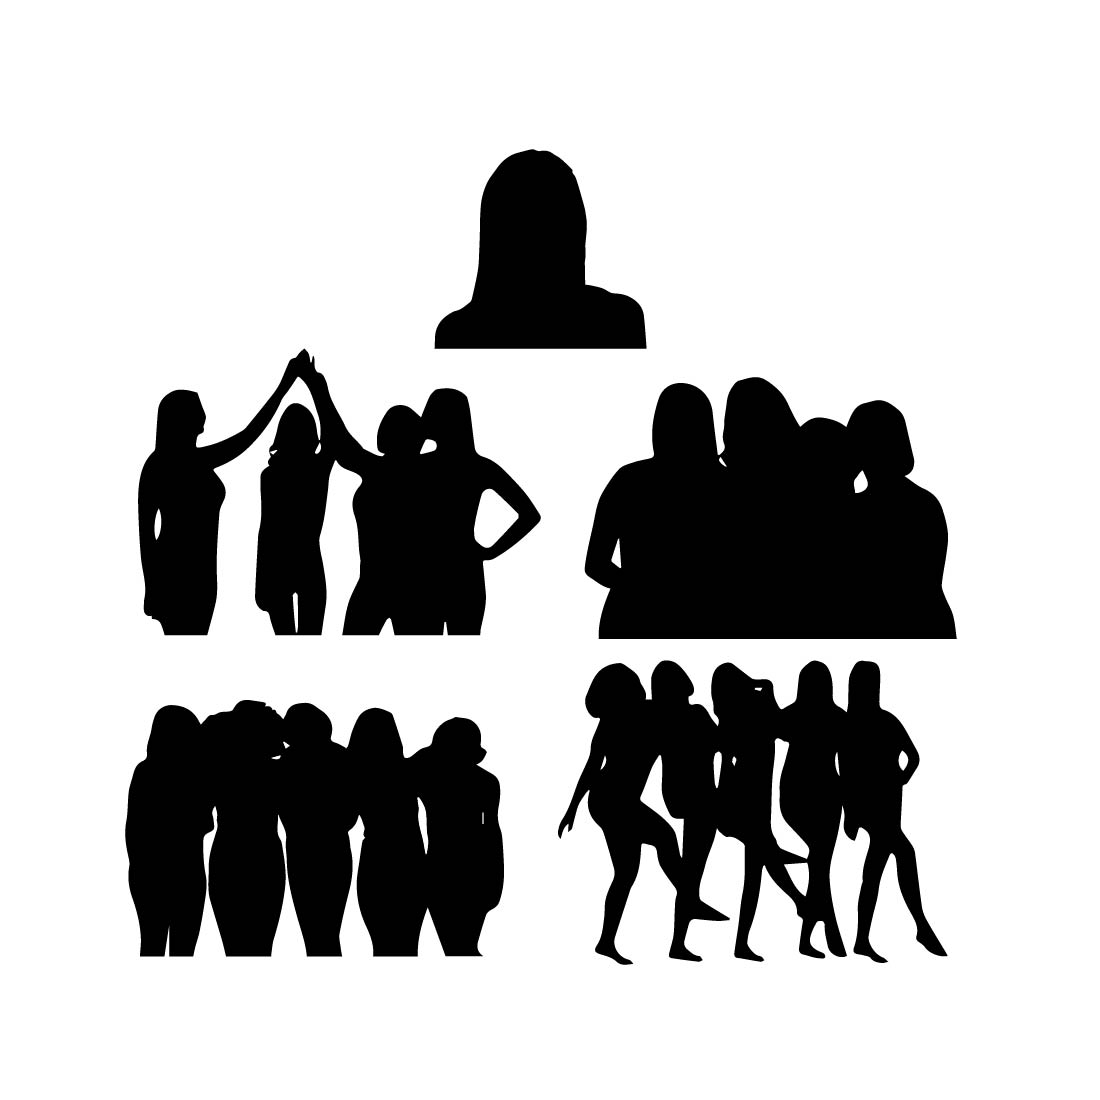 women silhouette set preview image.